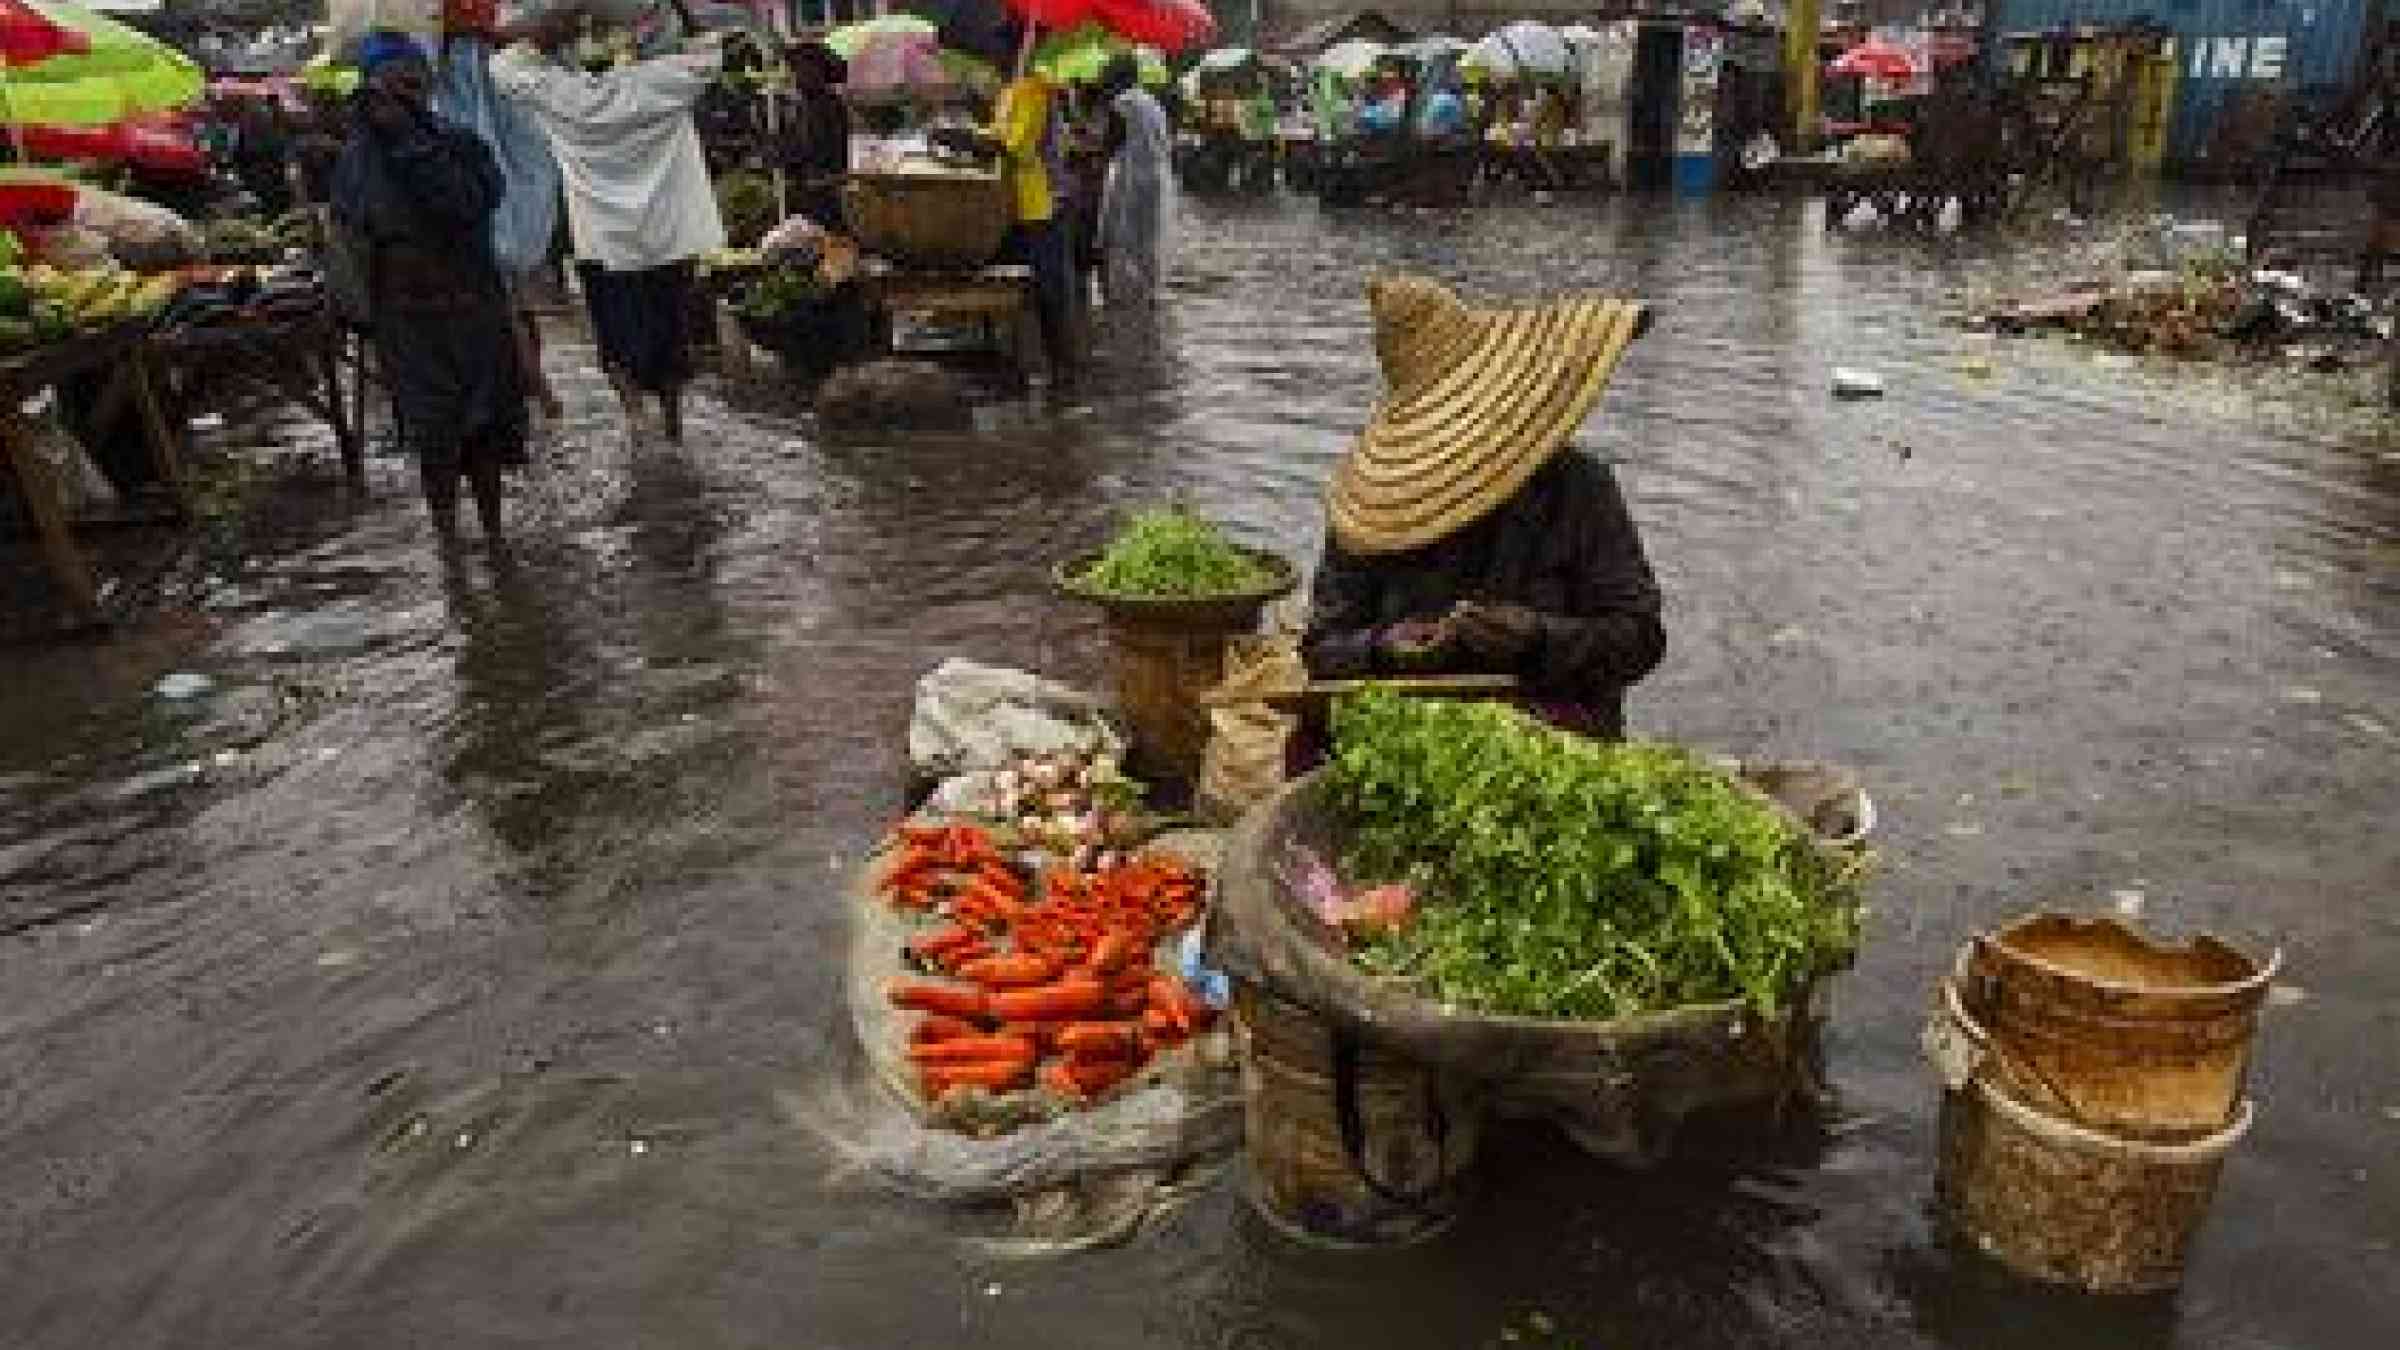 Hurricane Sandy passed to the west of Haiti on 25 October, causing heavy rains and strong winds, flooding homes and overflowing rivers. A woman sells produce at a flooded market place.